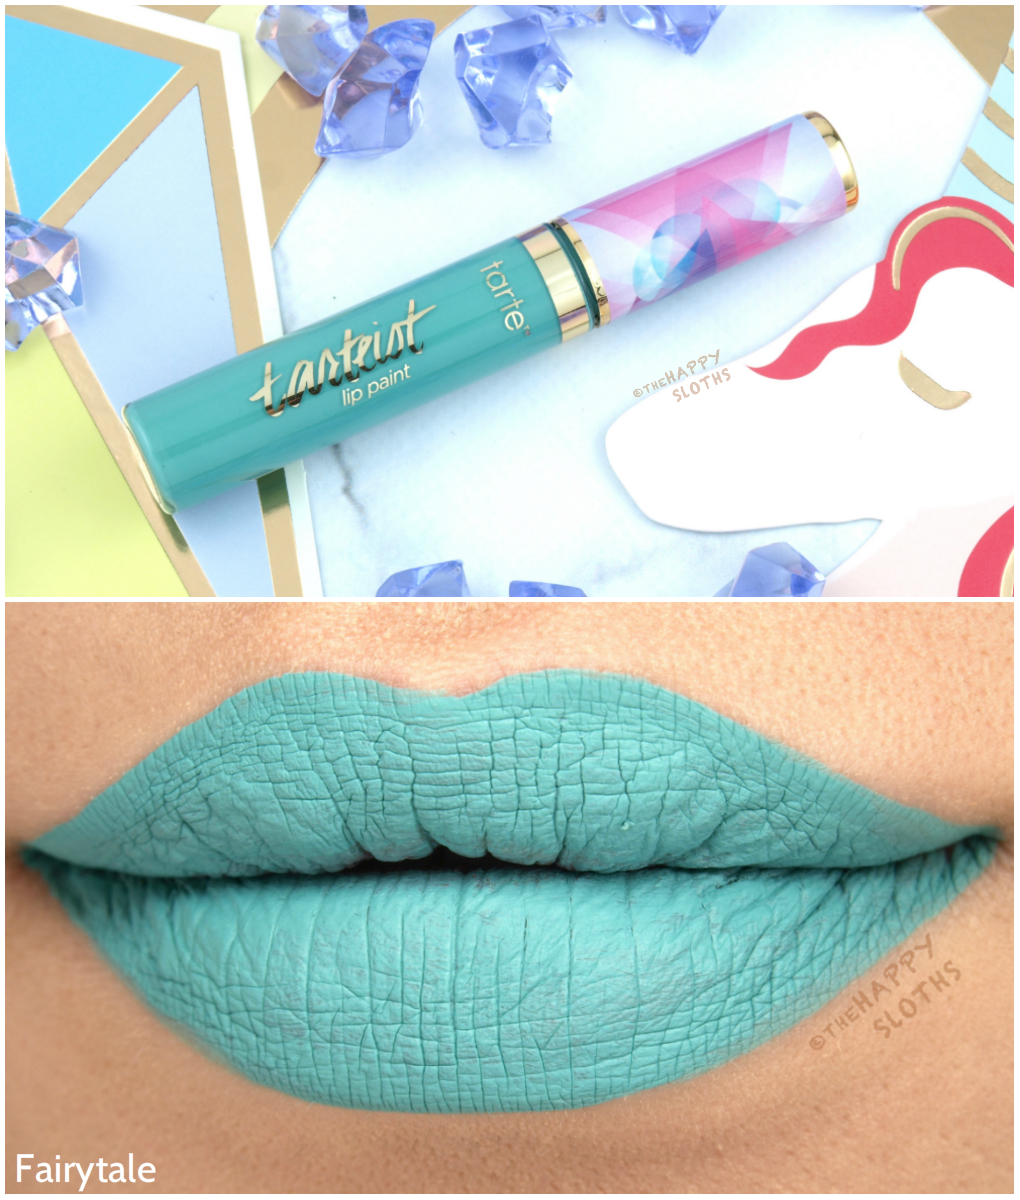 Tarte Summer 2017 Tarteist Quick Dry Matte Lip Paint in "Fairytale": Review and Swatches